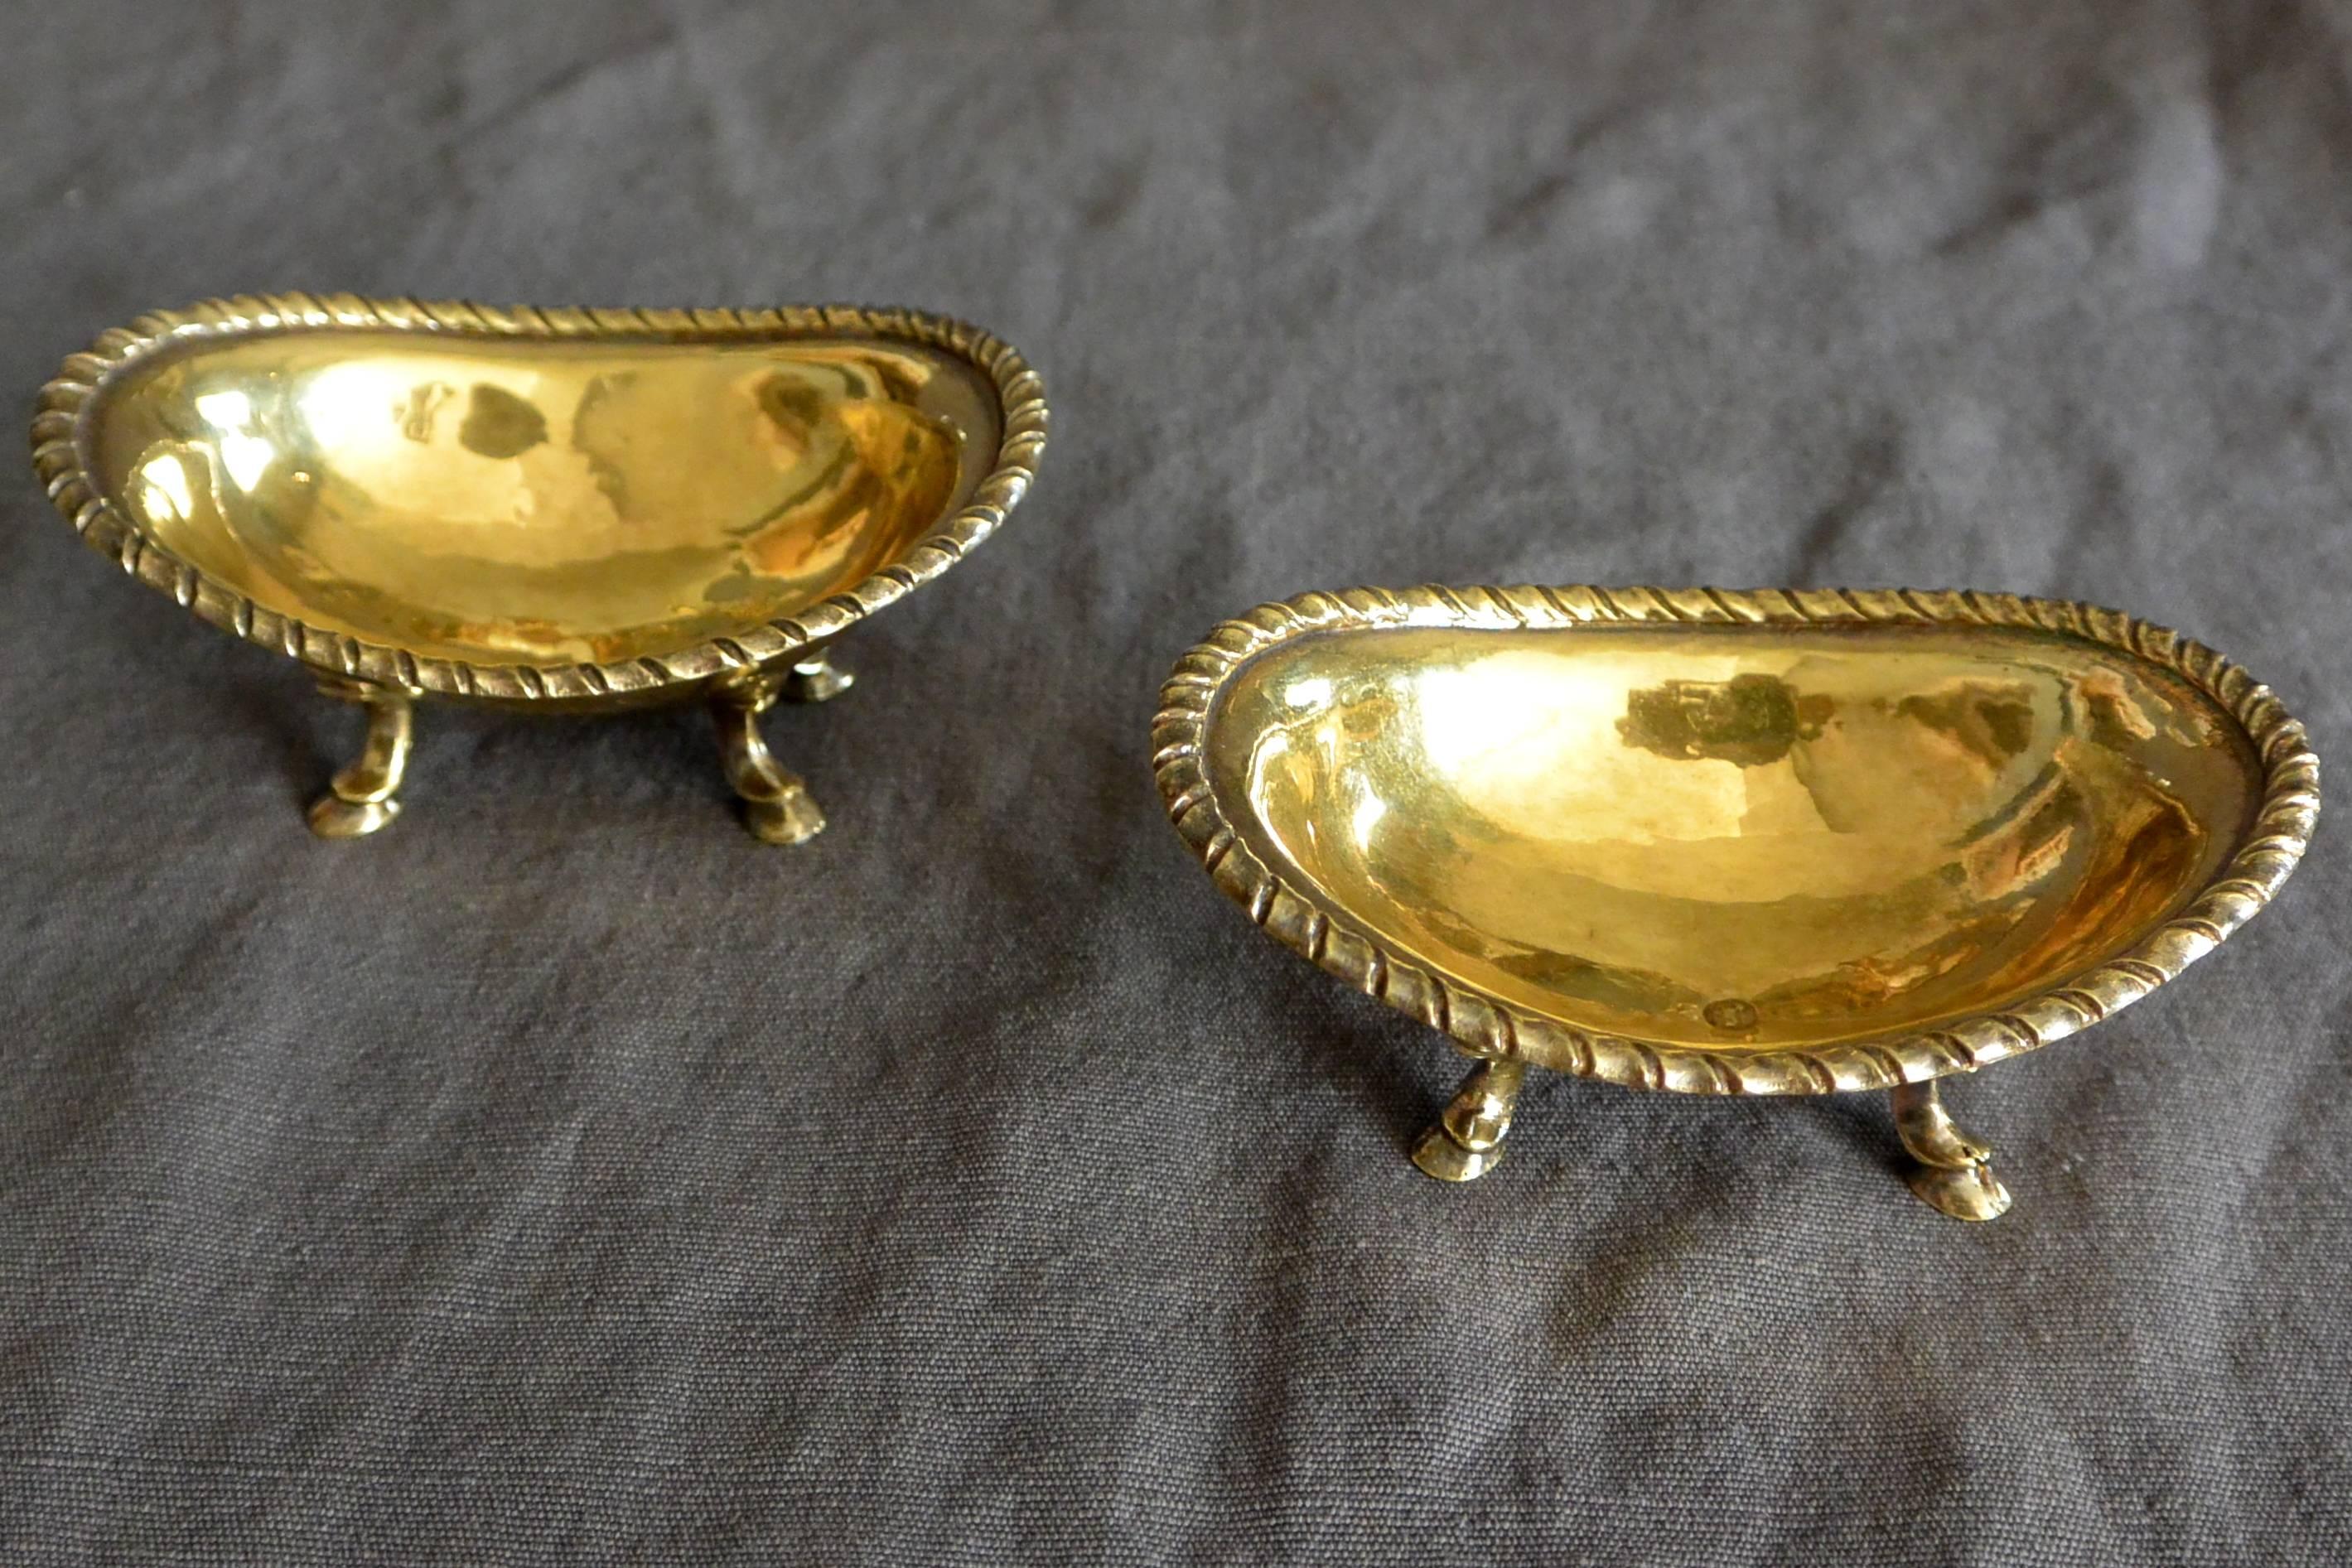 Pair of exceptional vermeil salt cellars with cord incised rims on hoof feet, Italy, 18th century. Stamped LF with goat. 
Dimension: 3.88